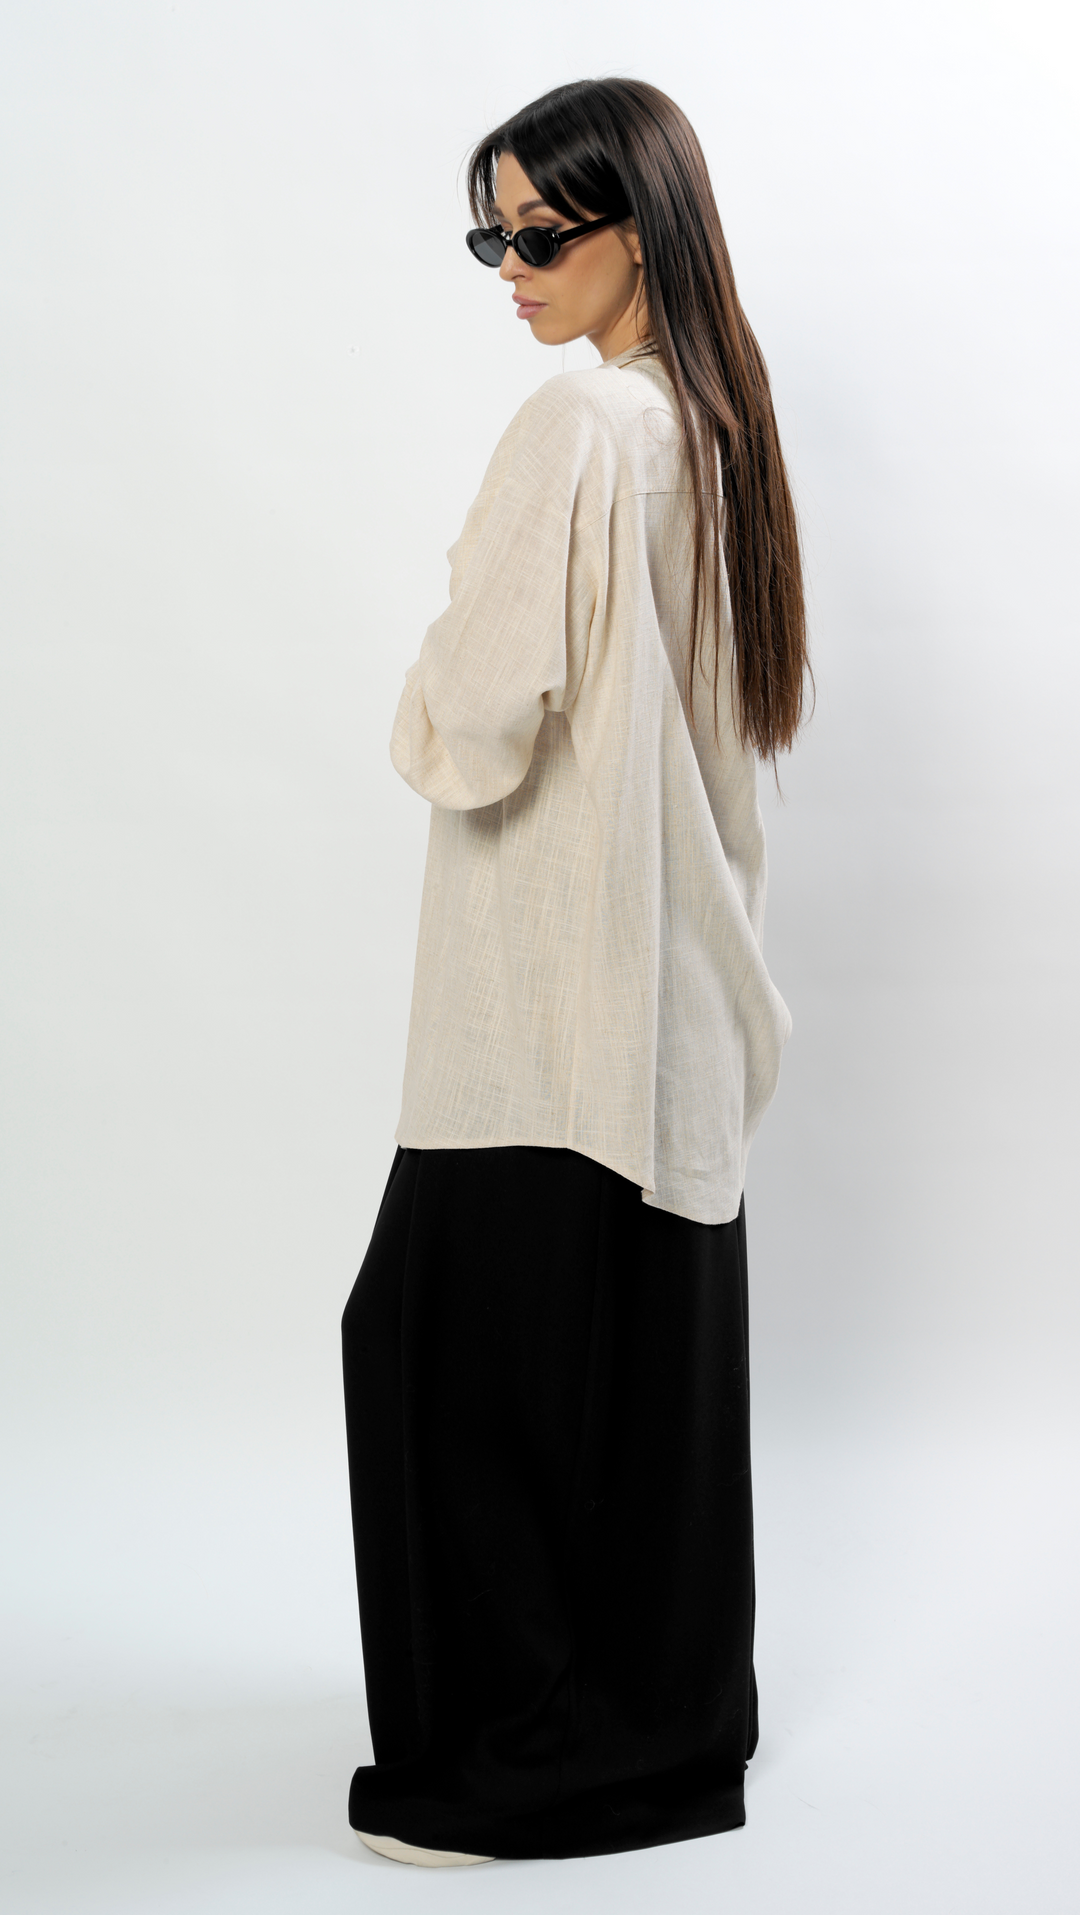 Beige shirt "BEAA x SFINKSA" BeaA - Be At Home with Yourself